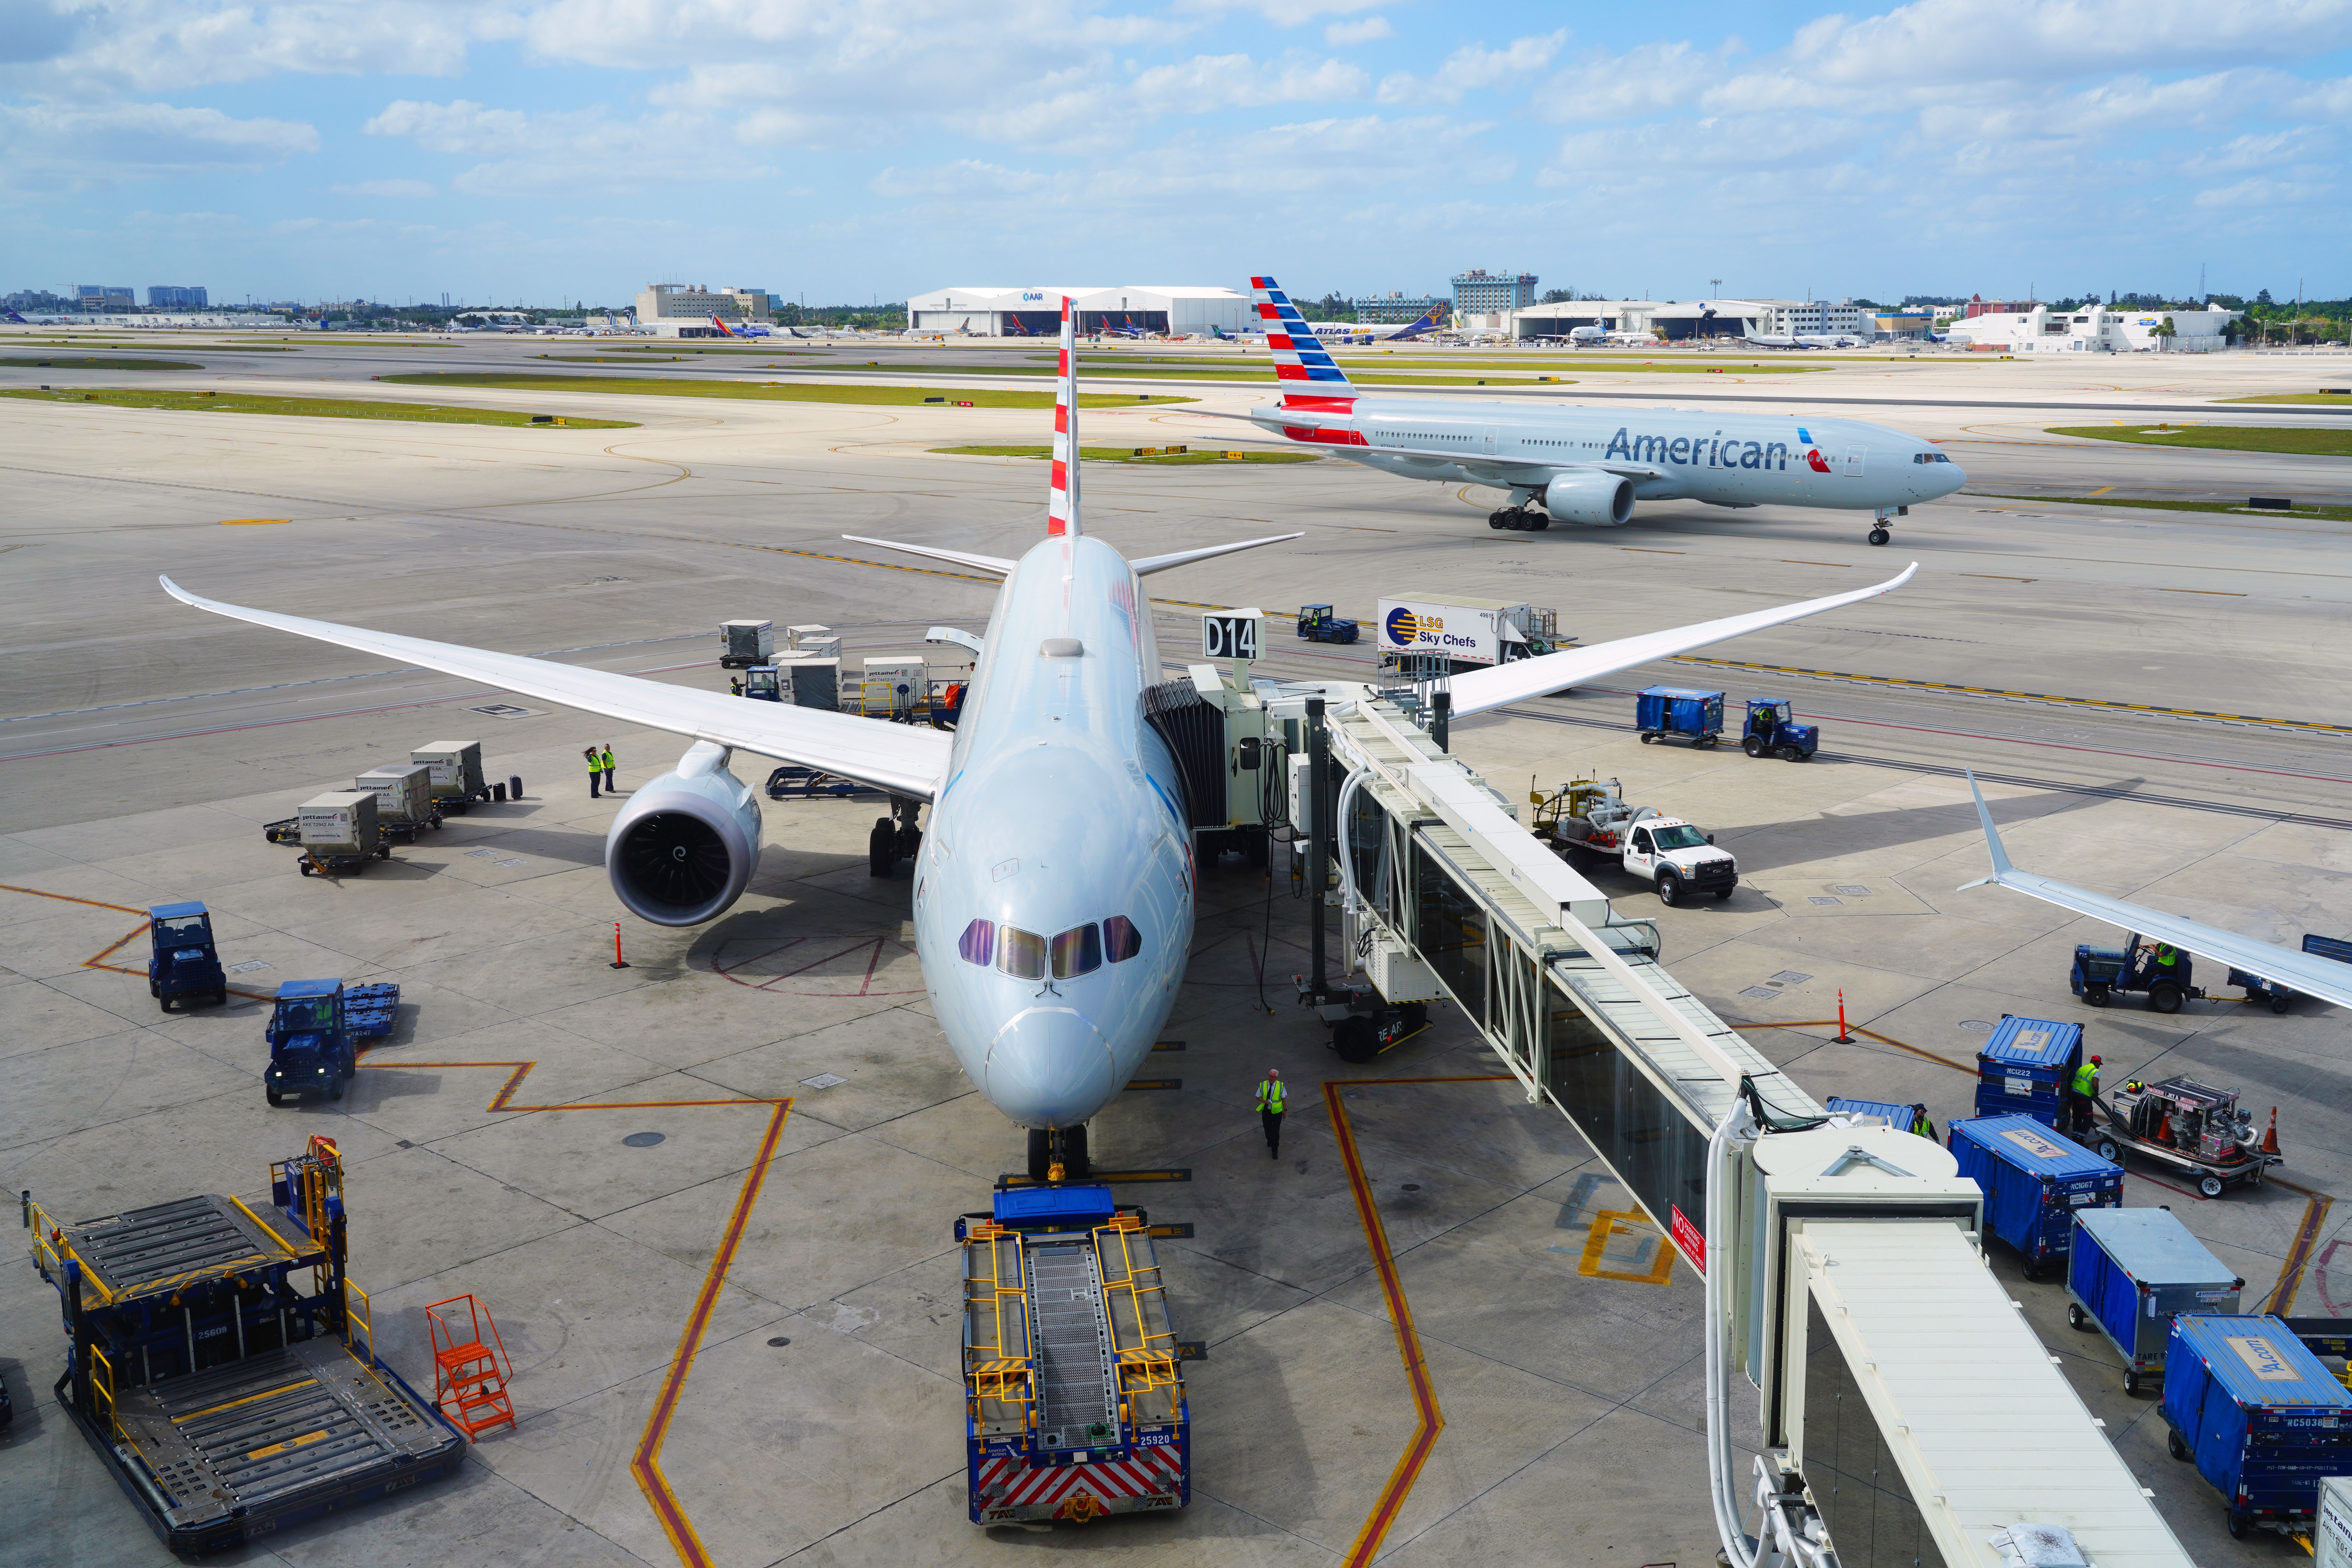 American Airlines Boeing 787 Dreamliner at the gate and Boeing 777-223/ER in the background at Miami International Airport.